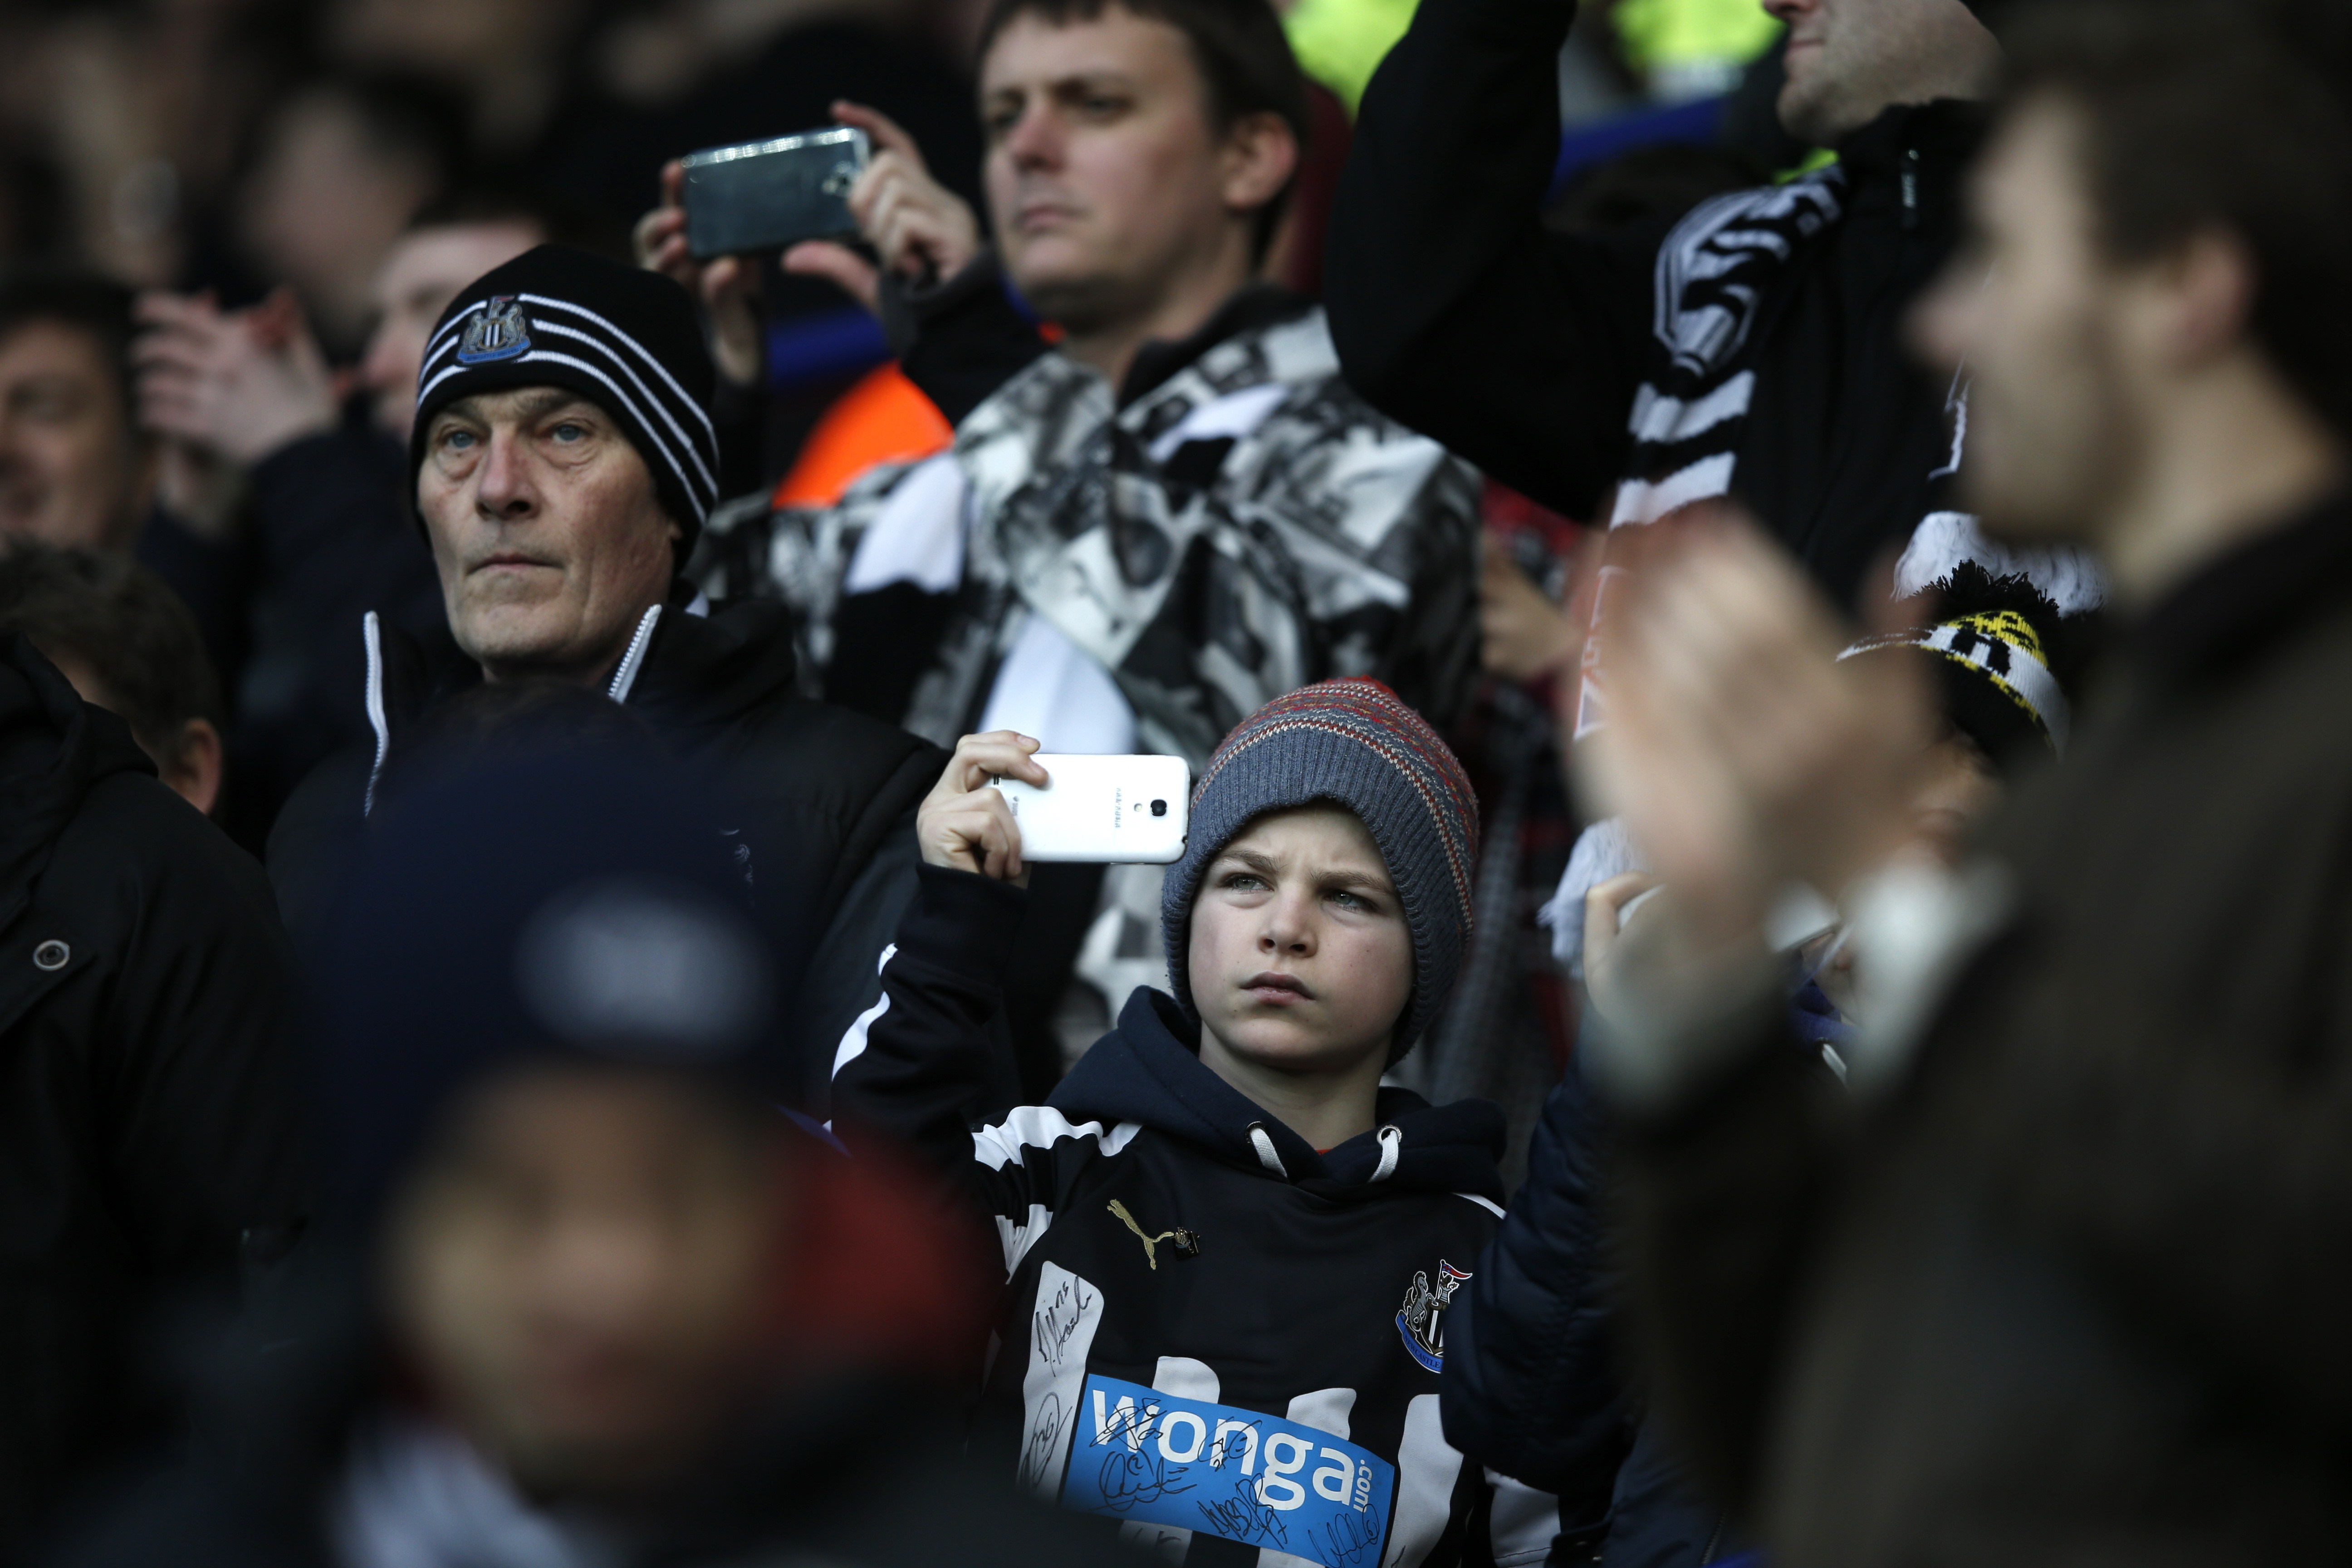 A Newcastle fan uses his mobile phone before kick off of the English FA Cup third round football match between Leicester City and Newcastle United at King Power Stadium in Leicester, central England on January 3, 2015. AFP PHOTO / ADRIAN DENNIS RESTRICTED TO EDITORIAL USE. No use with unauthorized audio, video, data, fixture lists, club/league logos or live services. Online in-match use limited to 45 images, no video emulation. No use in betting, games or single club/league/player publications.        (Photo credit should read ADRIAN DENNIS/AFP/Getty Images)